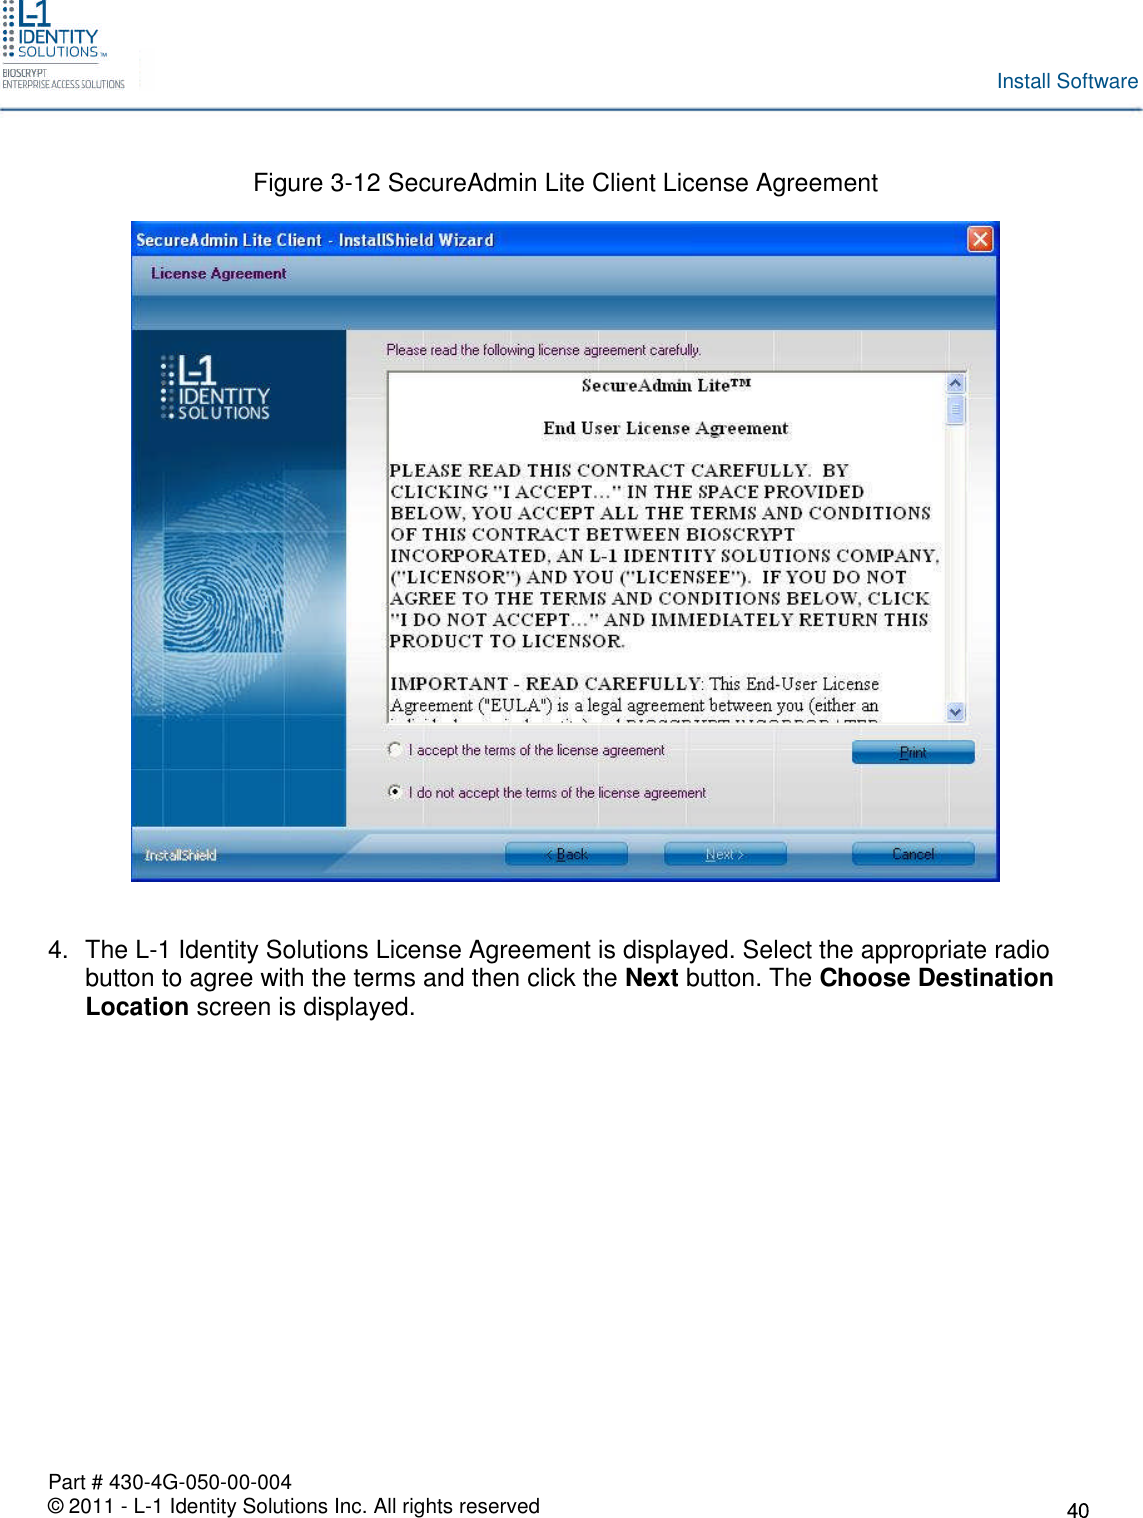 Part # 430-4G-050-00-004© 2011 - L-1 Identity Solutions Inc. All rights reservedInstall SoftwareFigure 3-12 SecureAdmin Lite Client License Agreement4. The L-1 Identity Solutions License Agreement is displayed. Select the appropriate radiobutton to agree with the terms and then click the Next button. The Choose DestinationLocation screen is displayed.